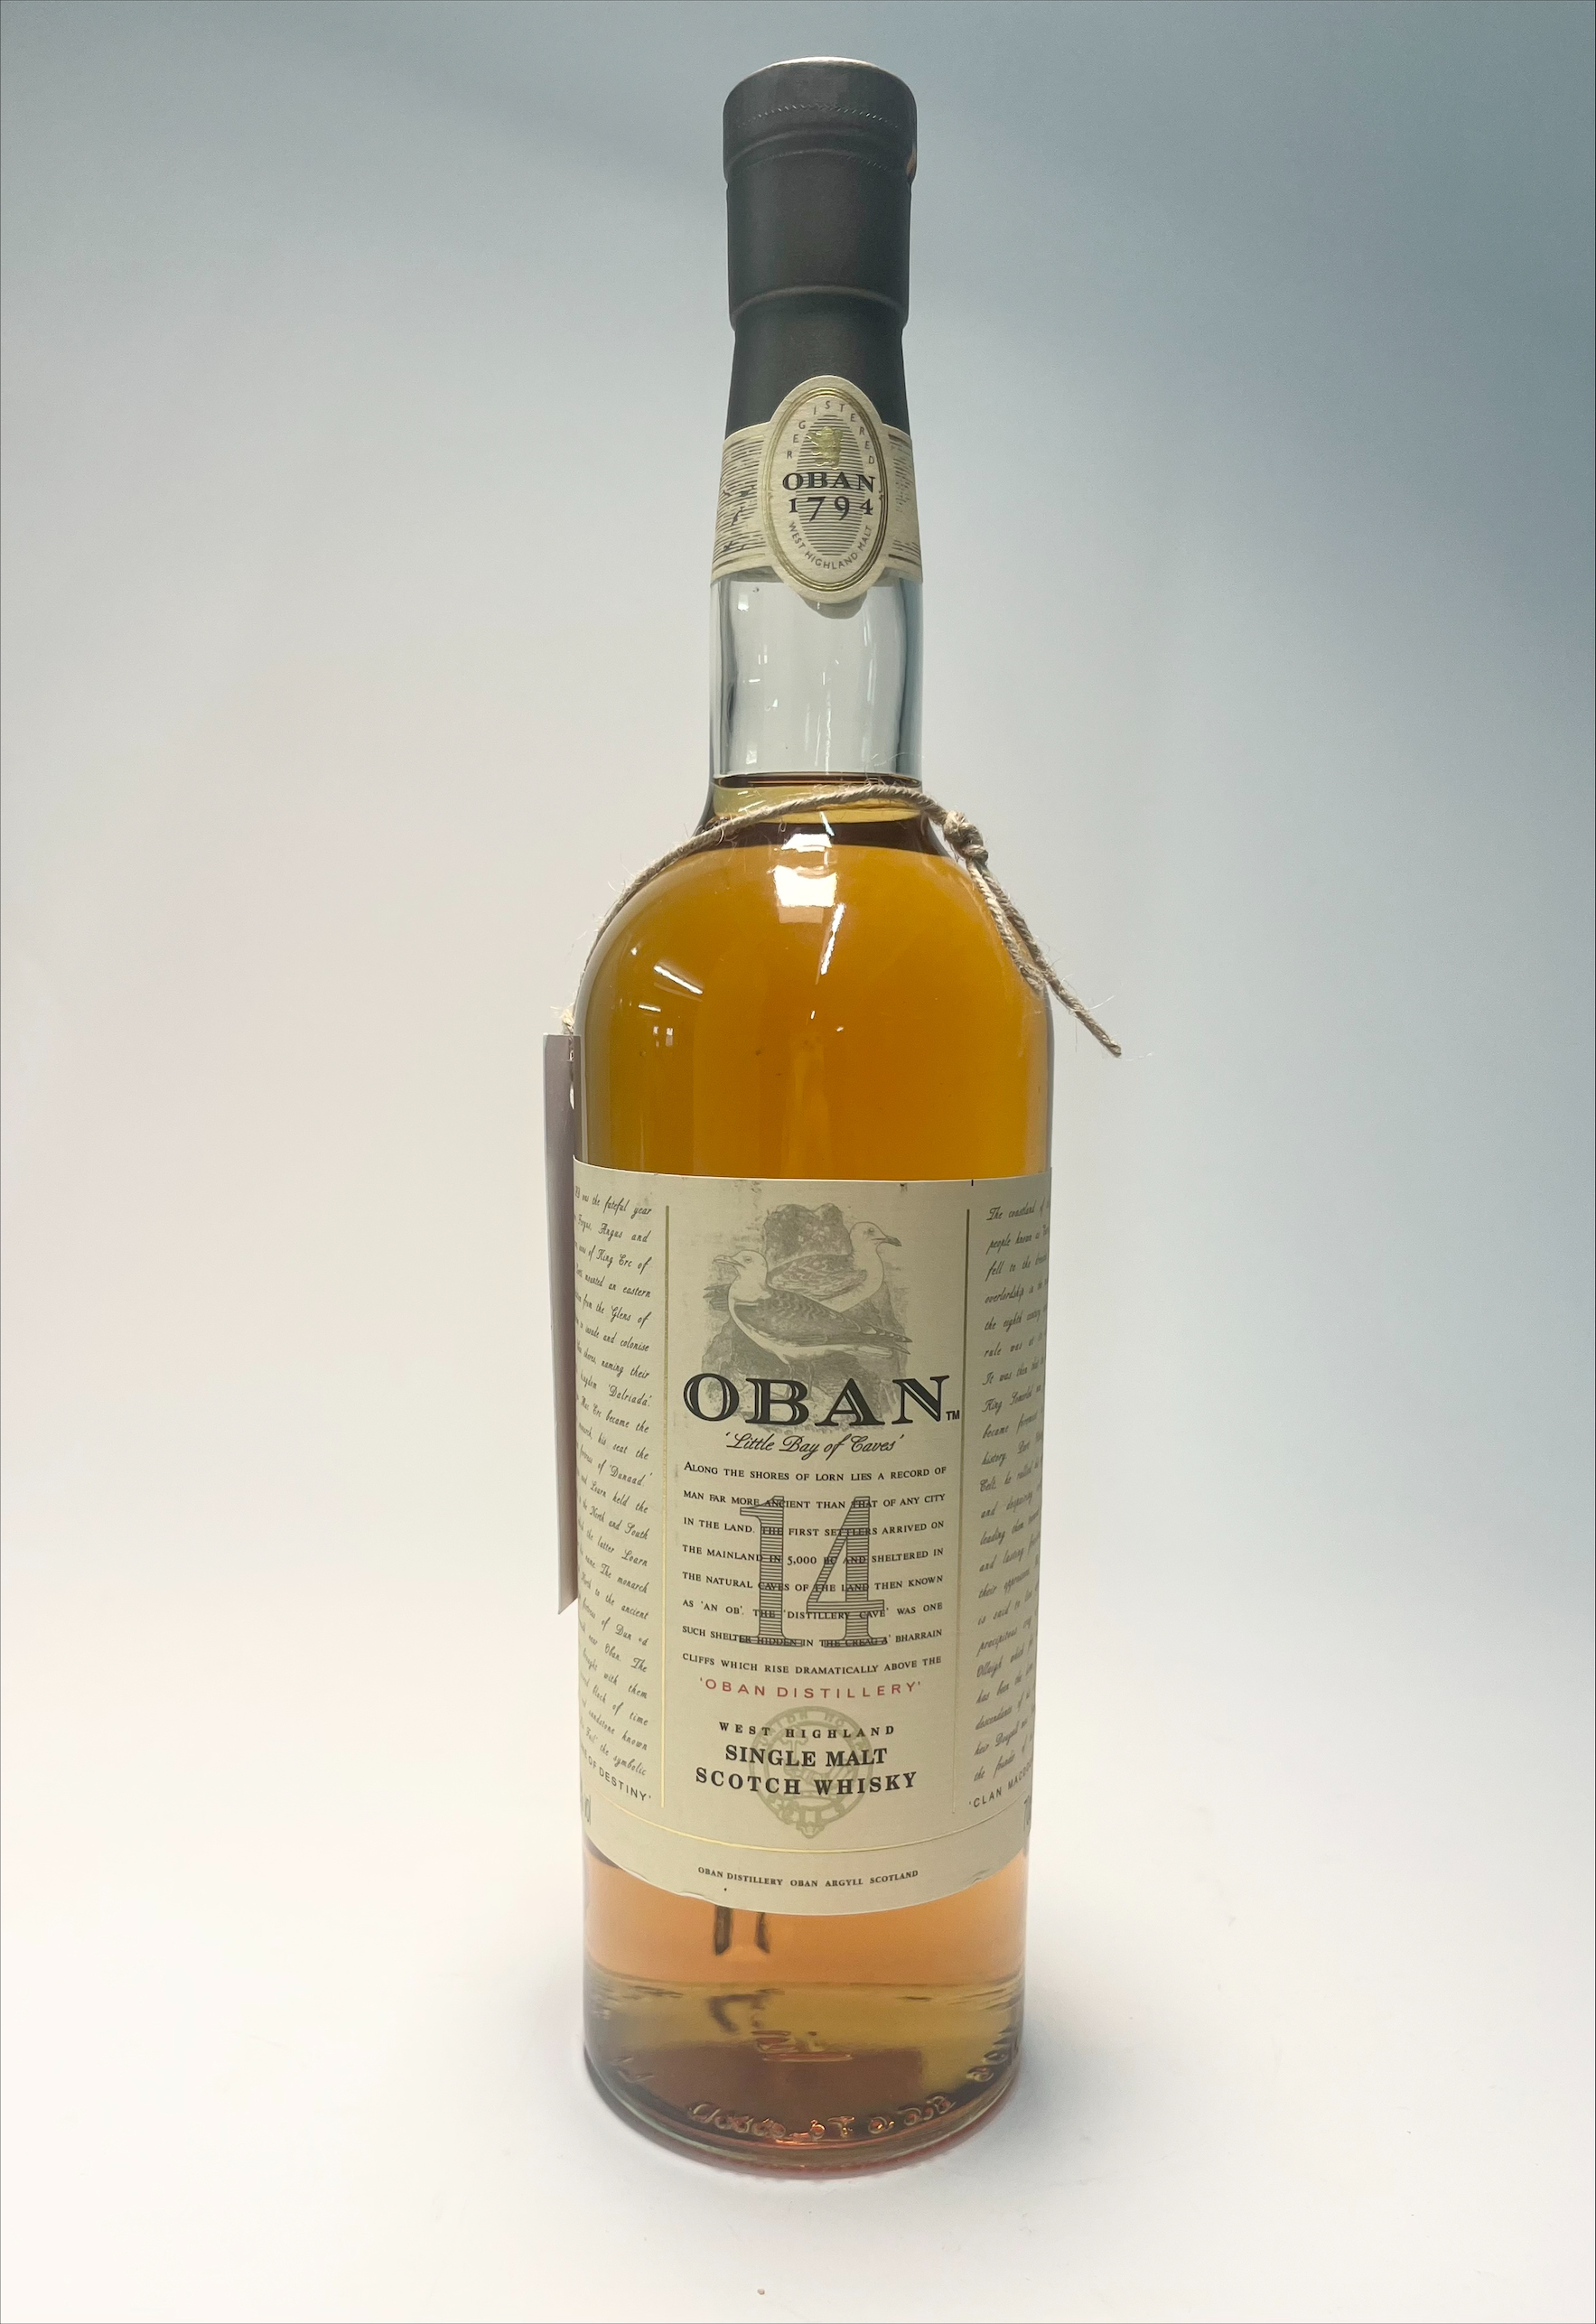 A bottle of Oban Single Malt Scotch Whisky, aged 14 years, distilled in Scotland, 70cl.